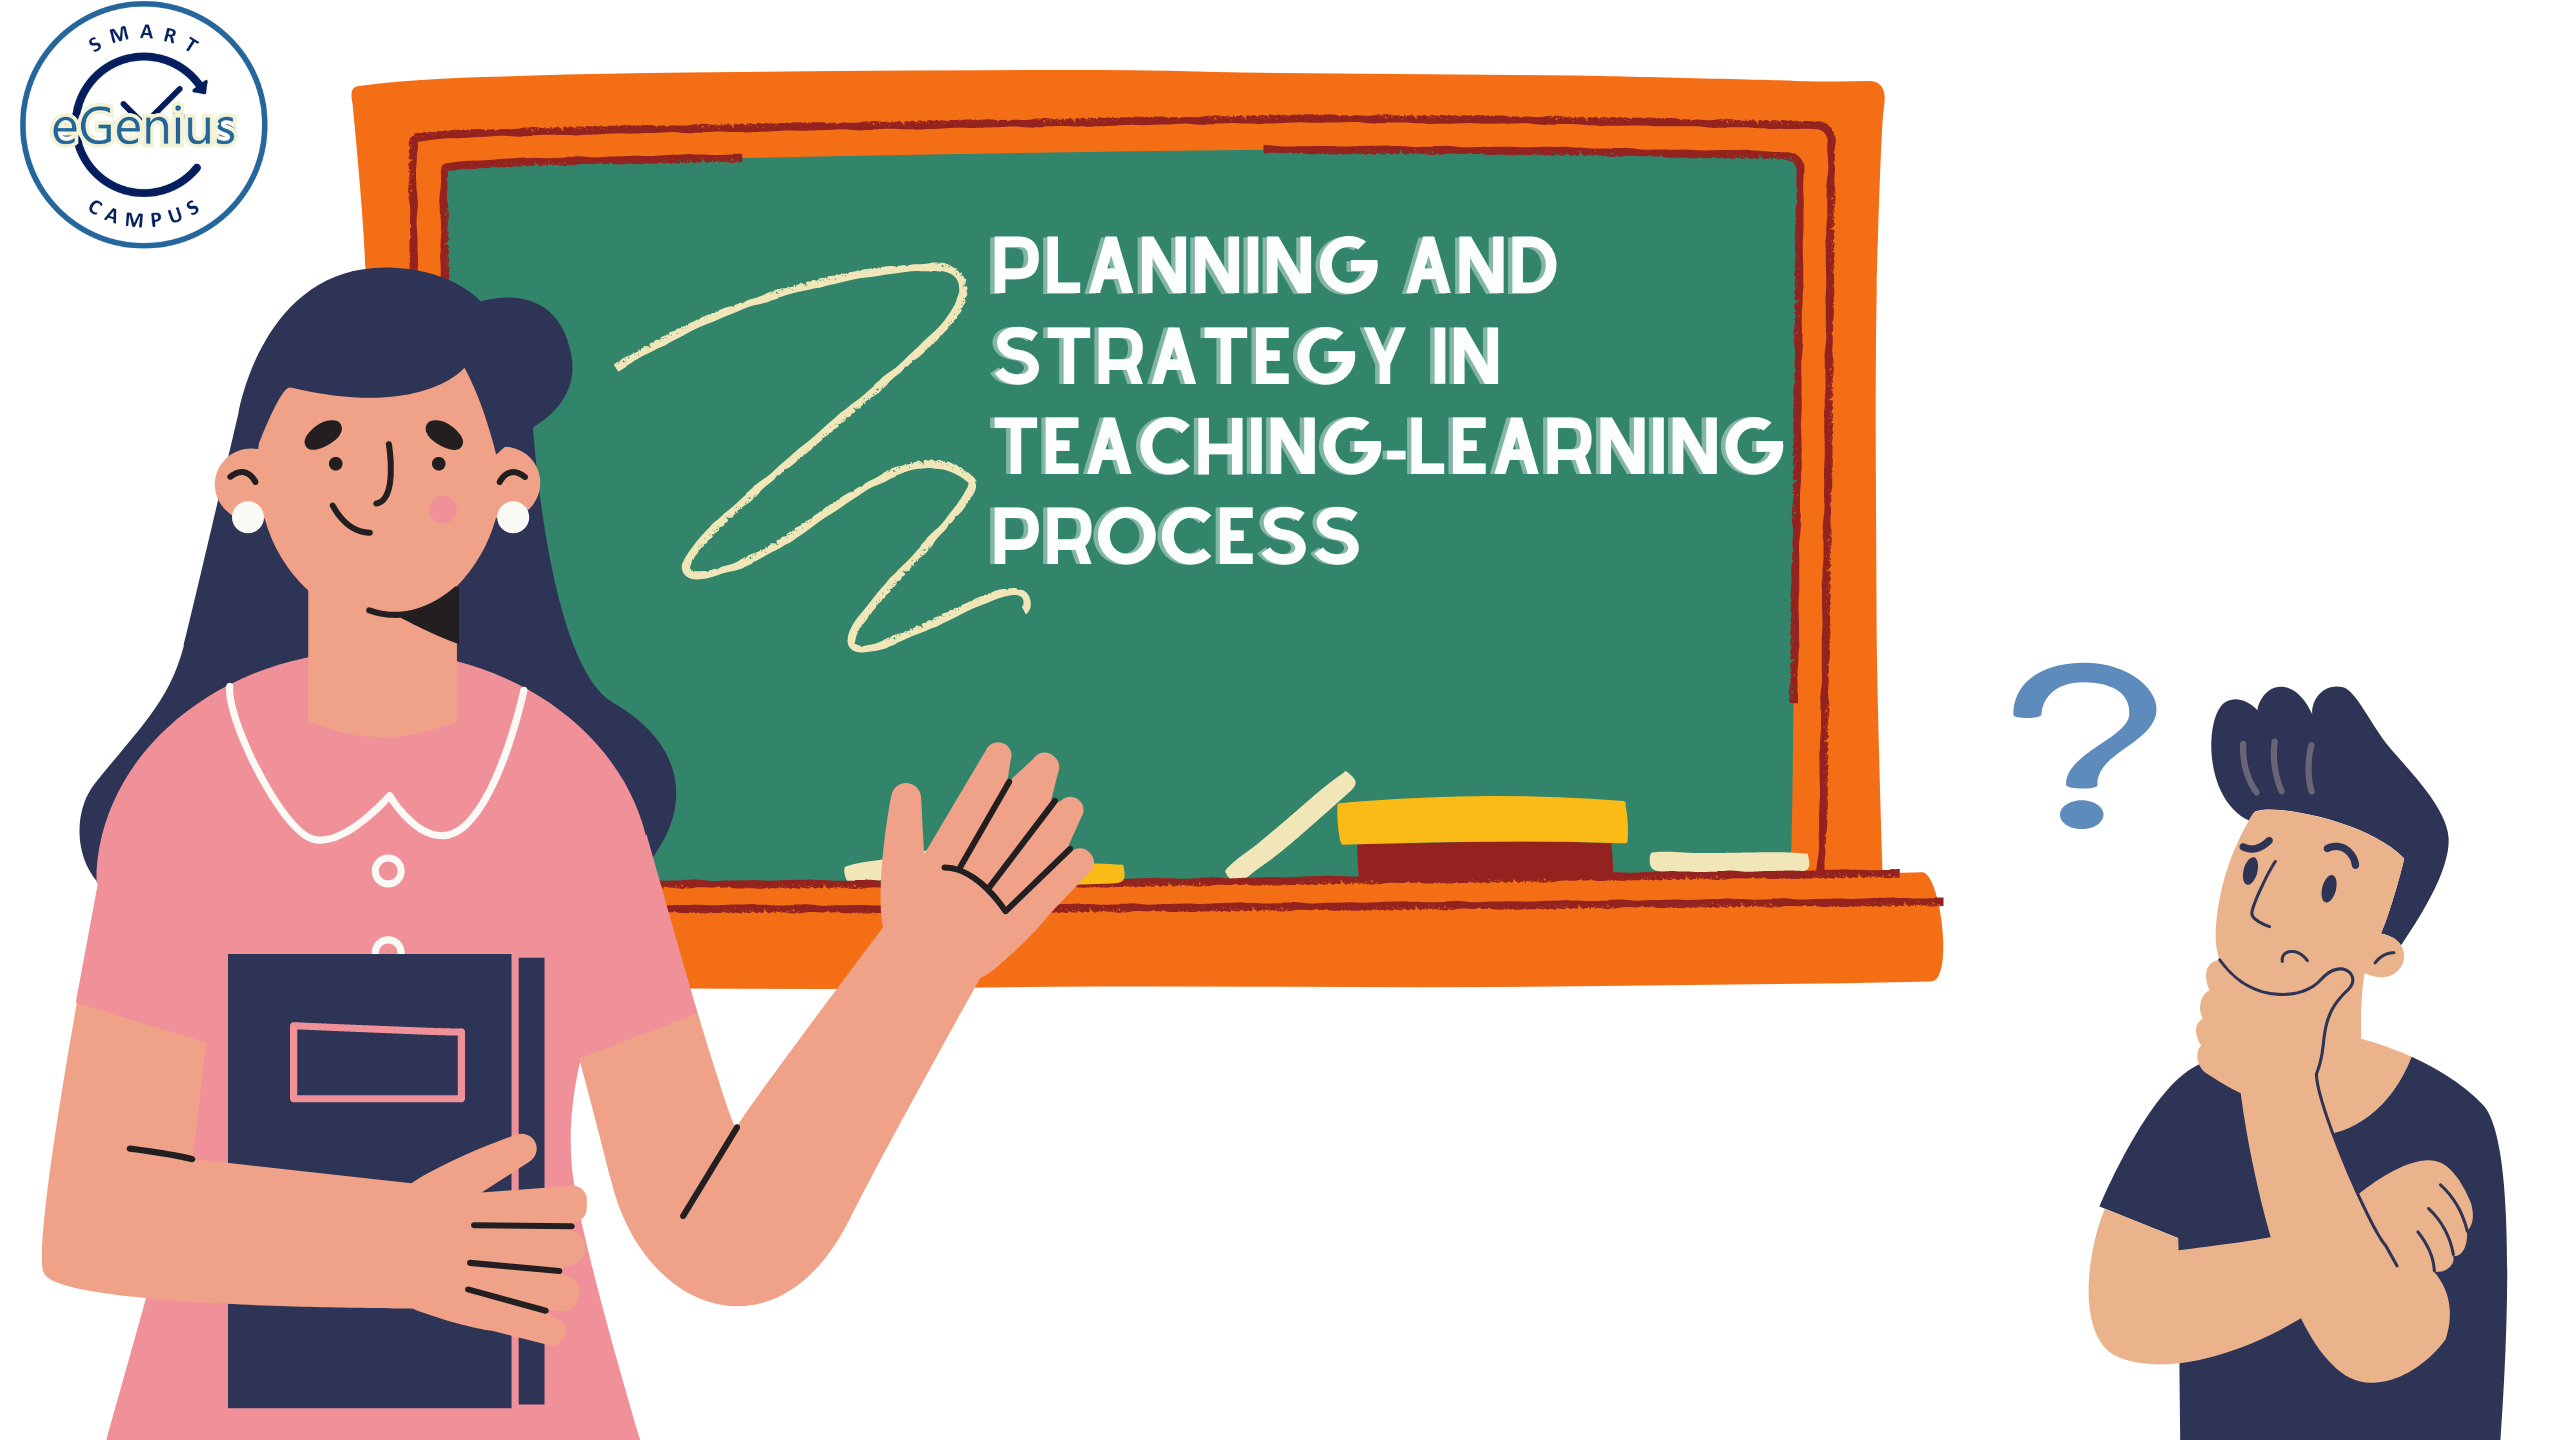 Planning in Teaching-Learning Process